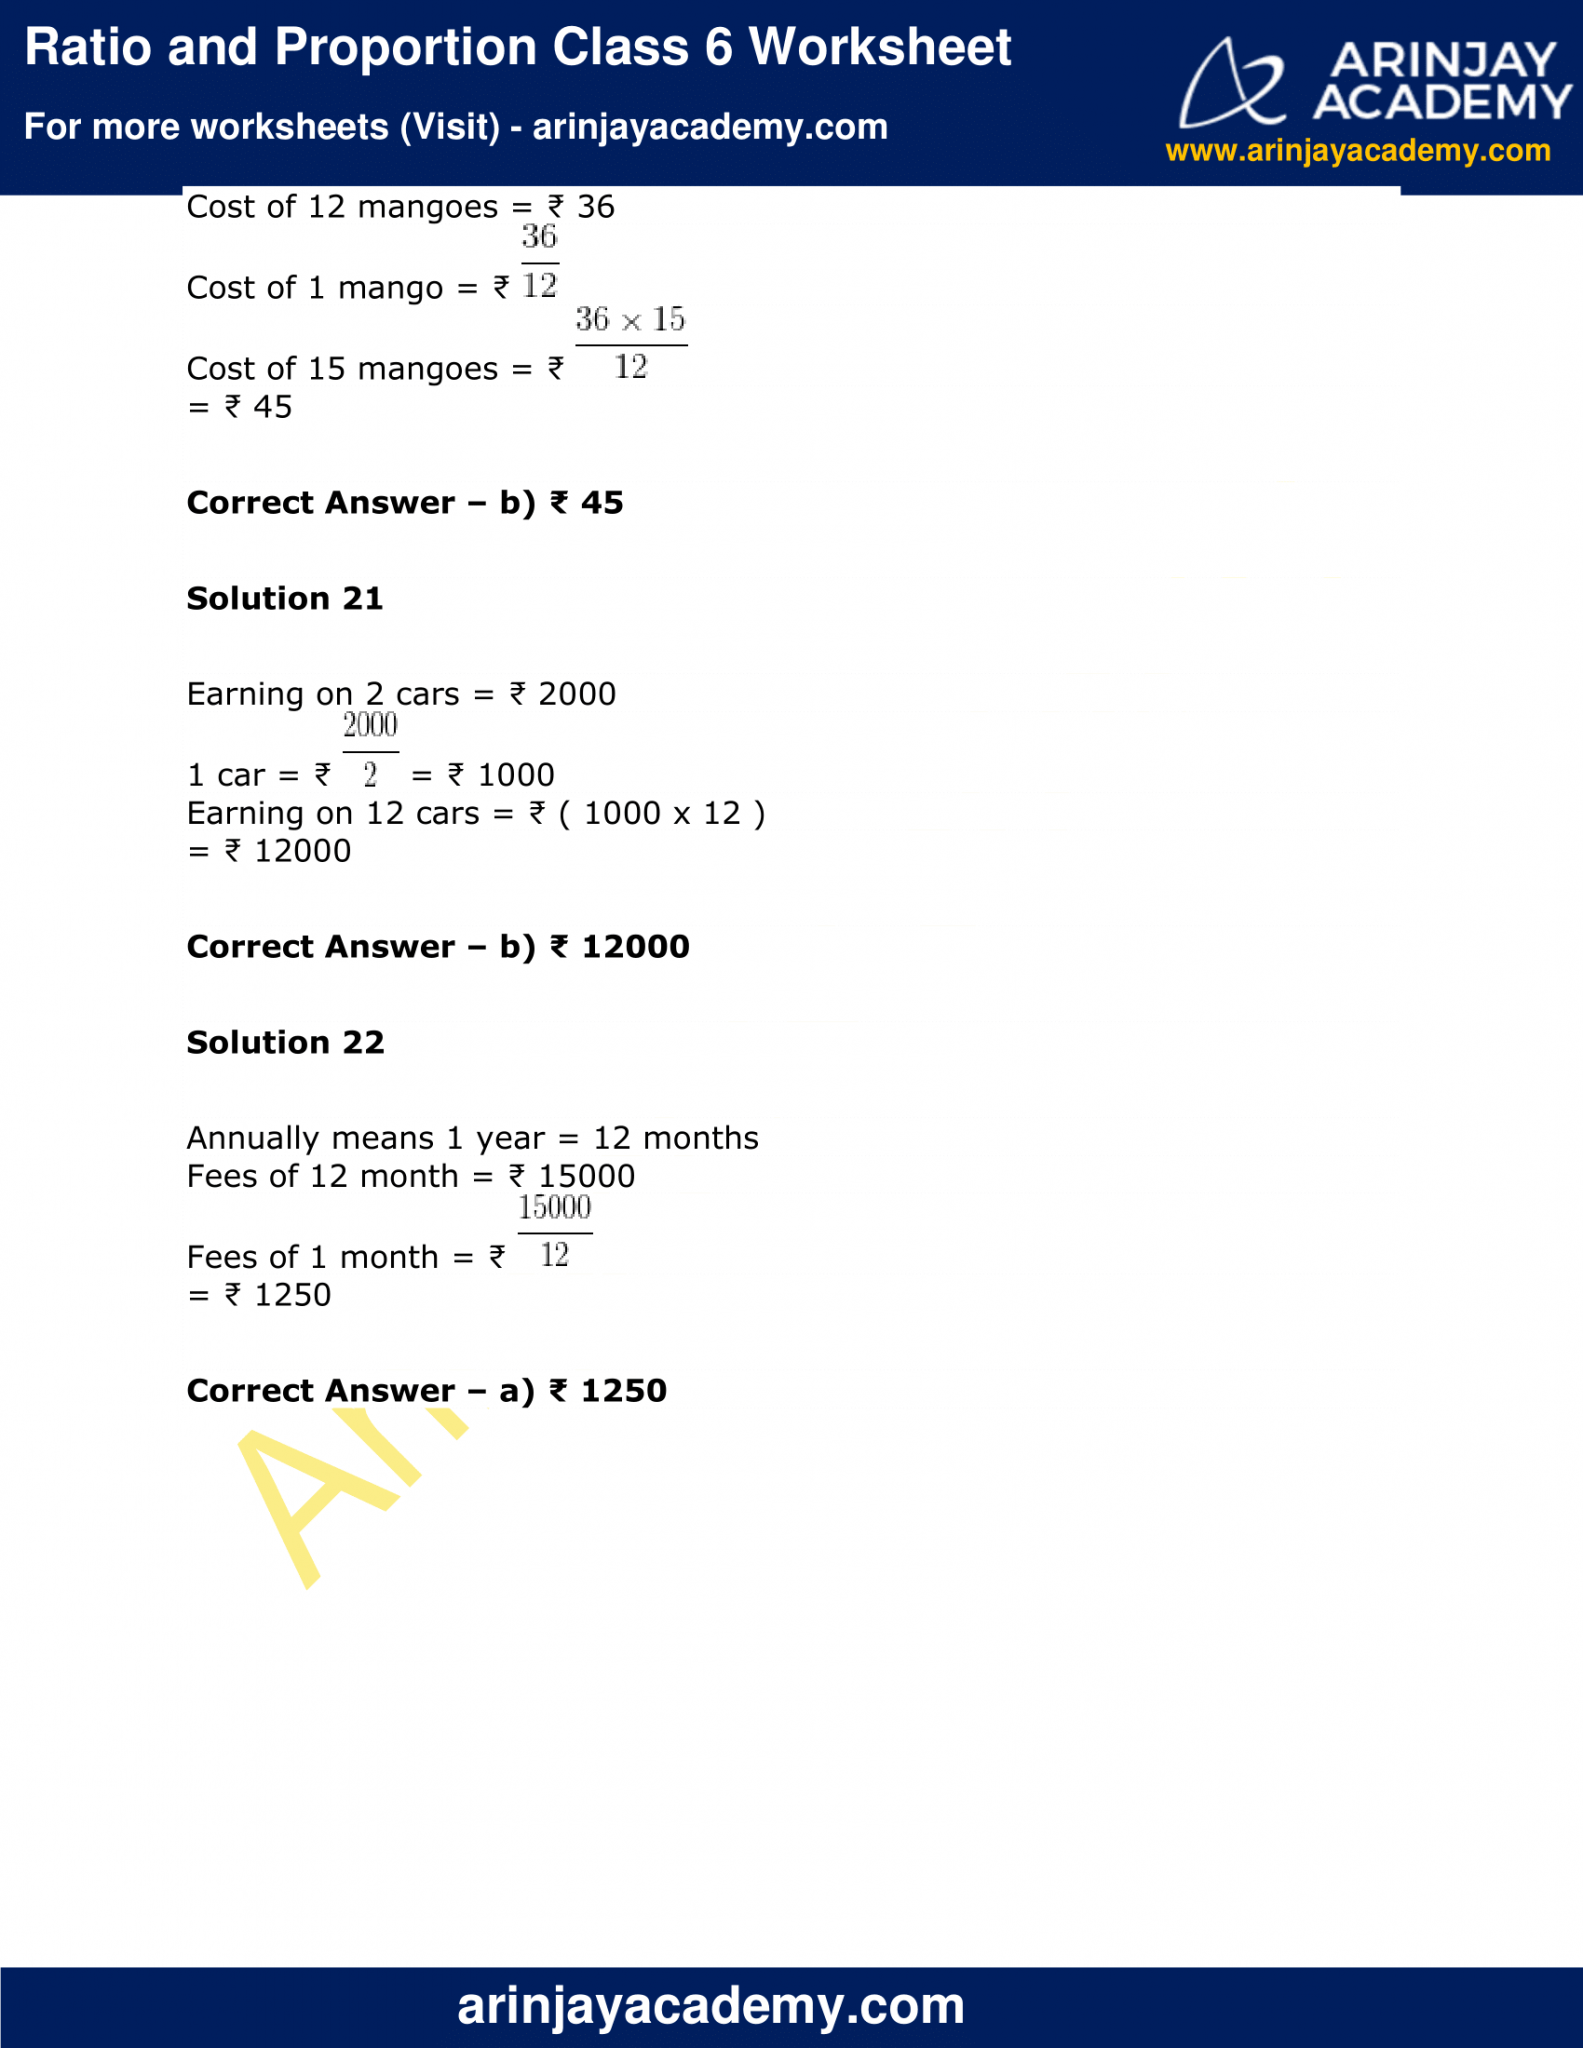 assignment on ratio and proportion class 6